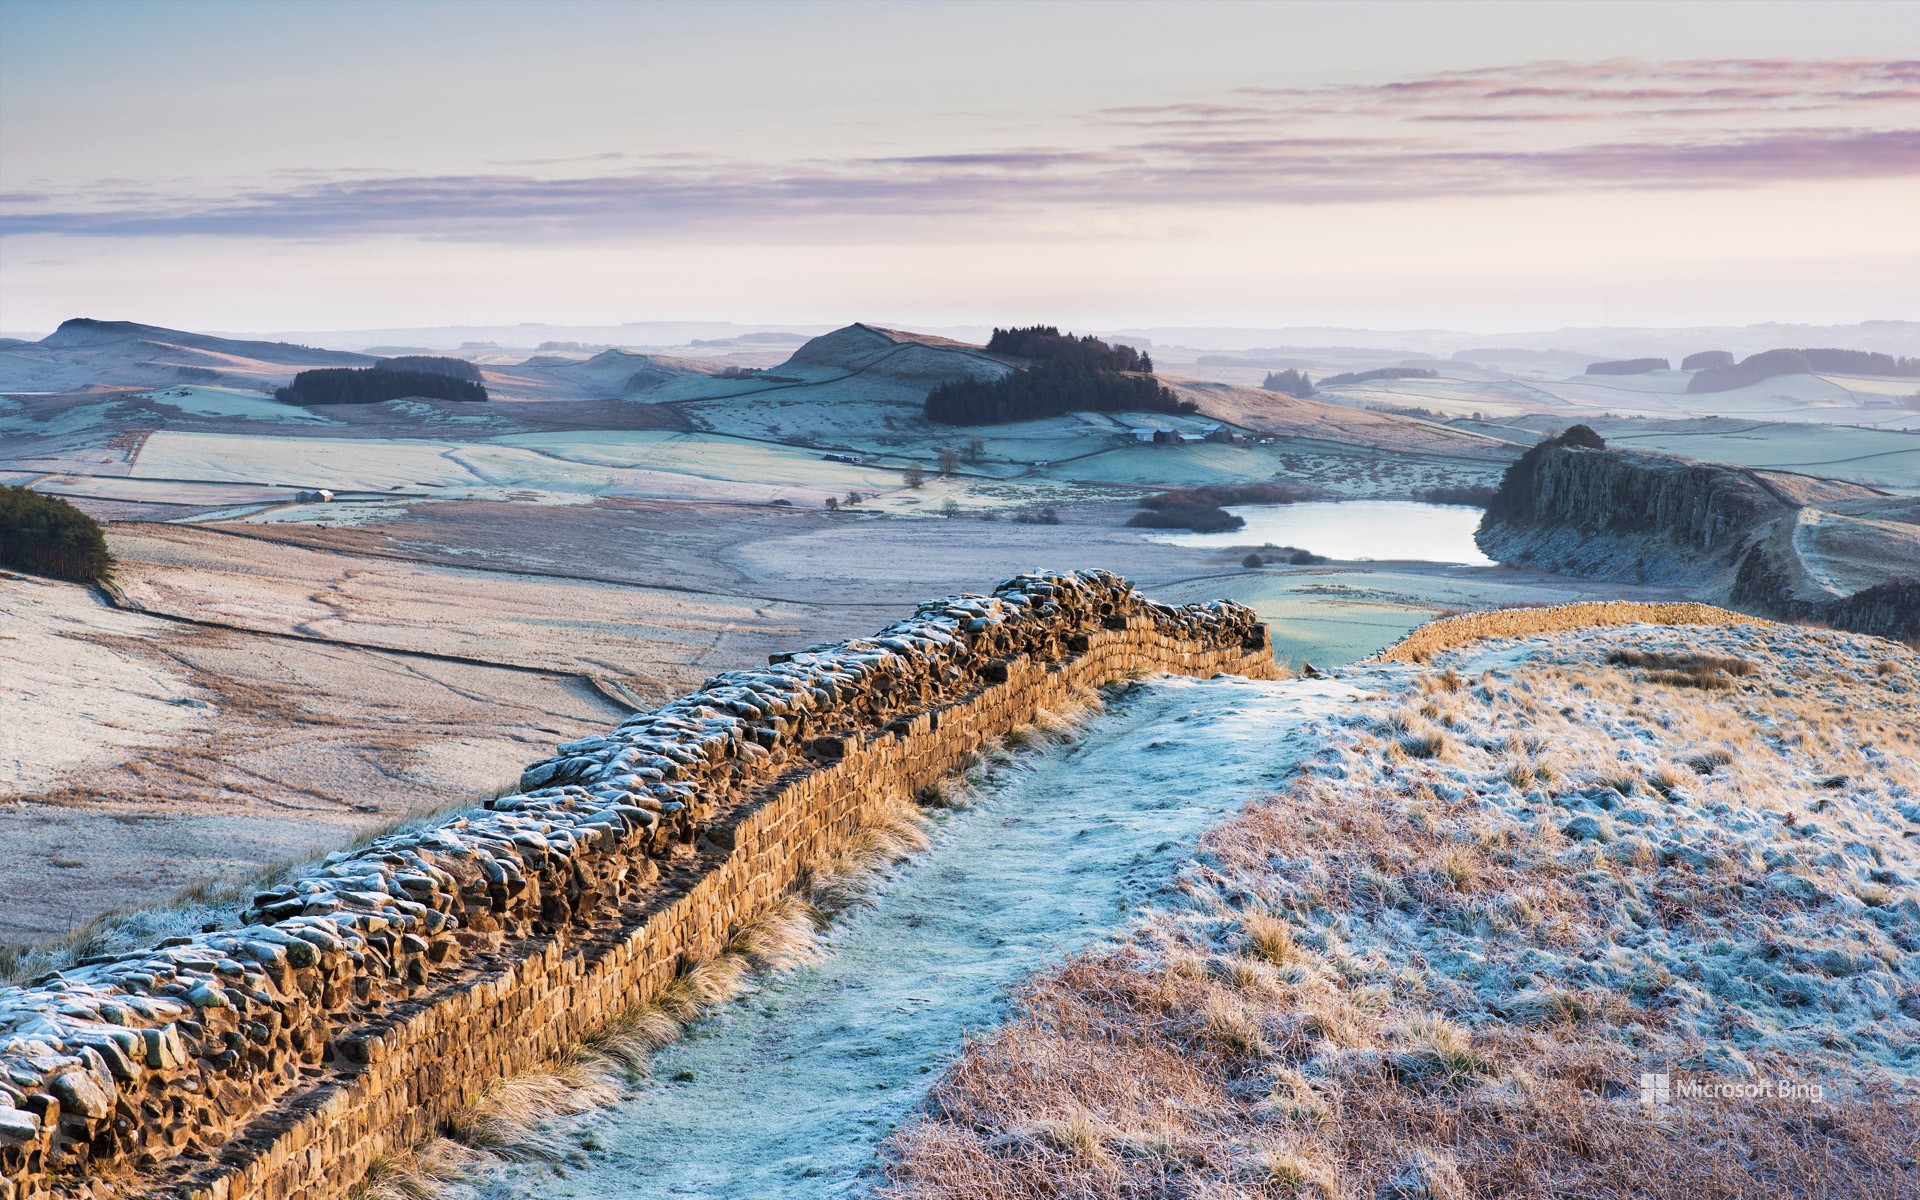 Frosty morning at Hadrian's Wall on Winshields Crags, looking towards Crag Lough in Northumberland